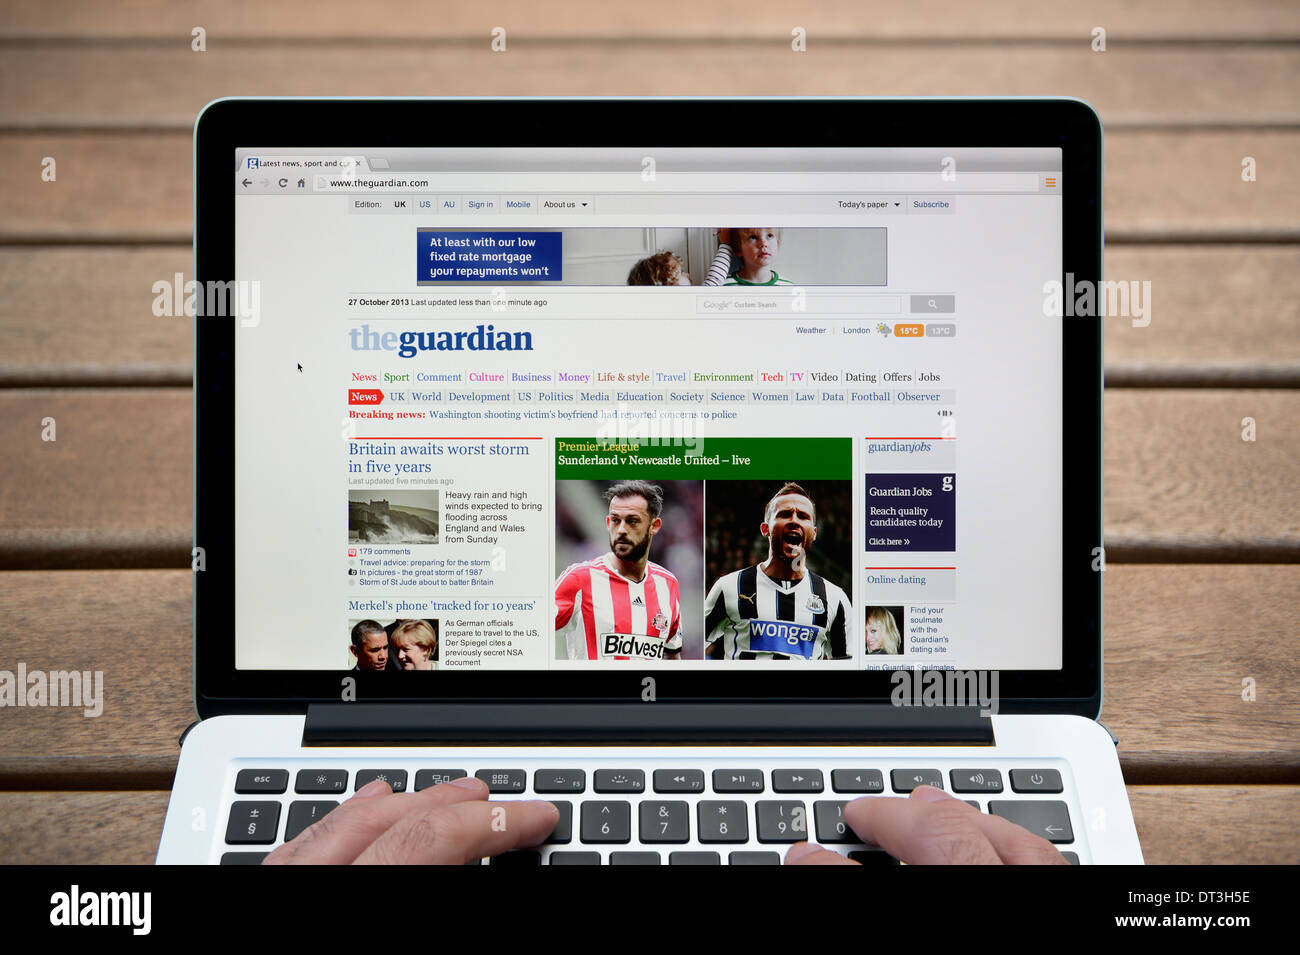 The Guardian website on a MacBook against a wooden bench outdoor background including a man's fingers (Editorial use only). Stock Photo